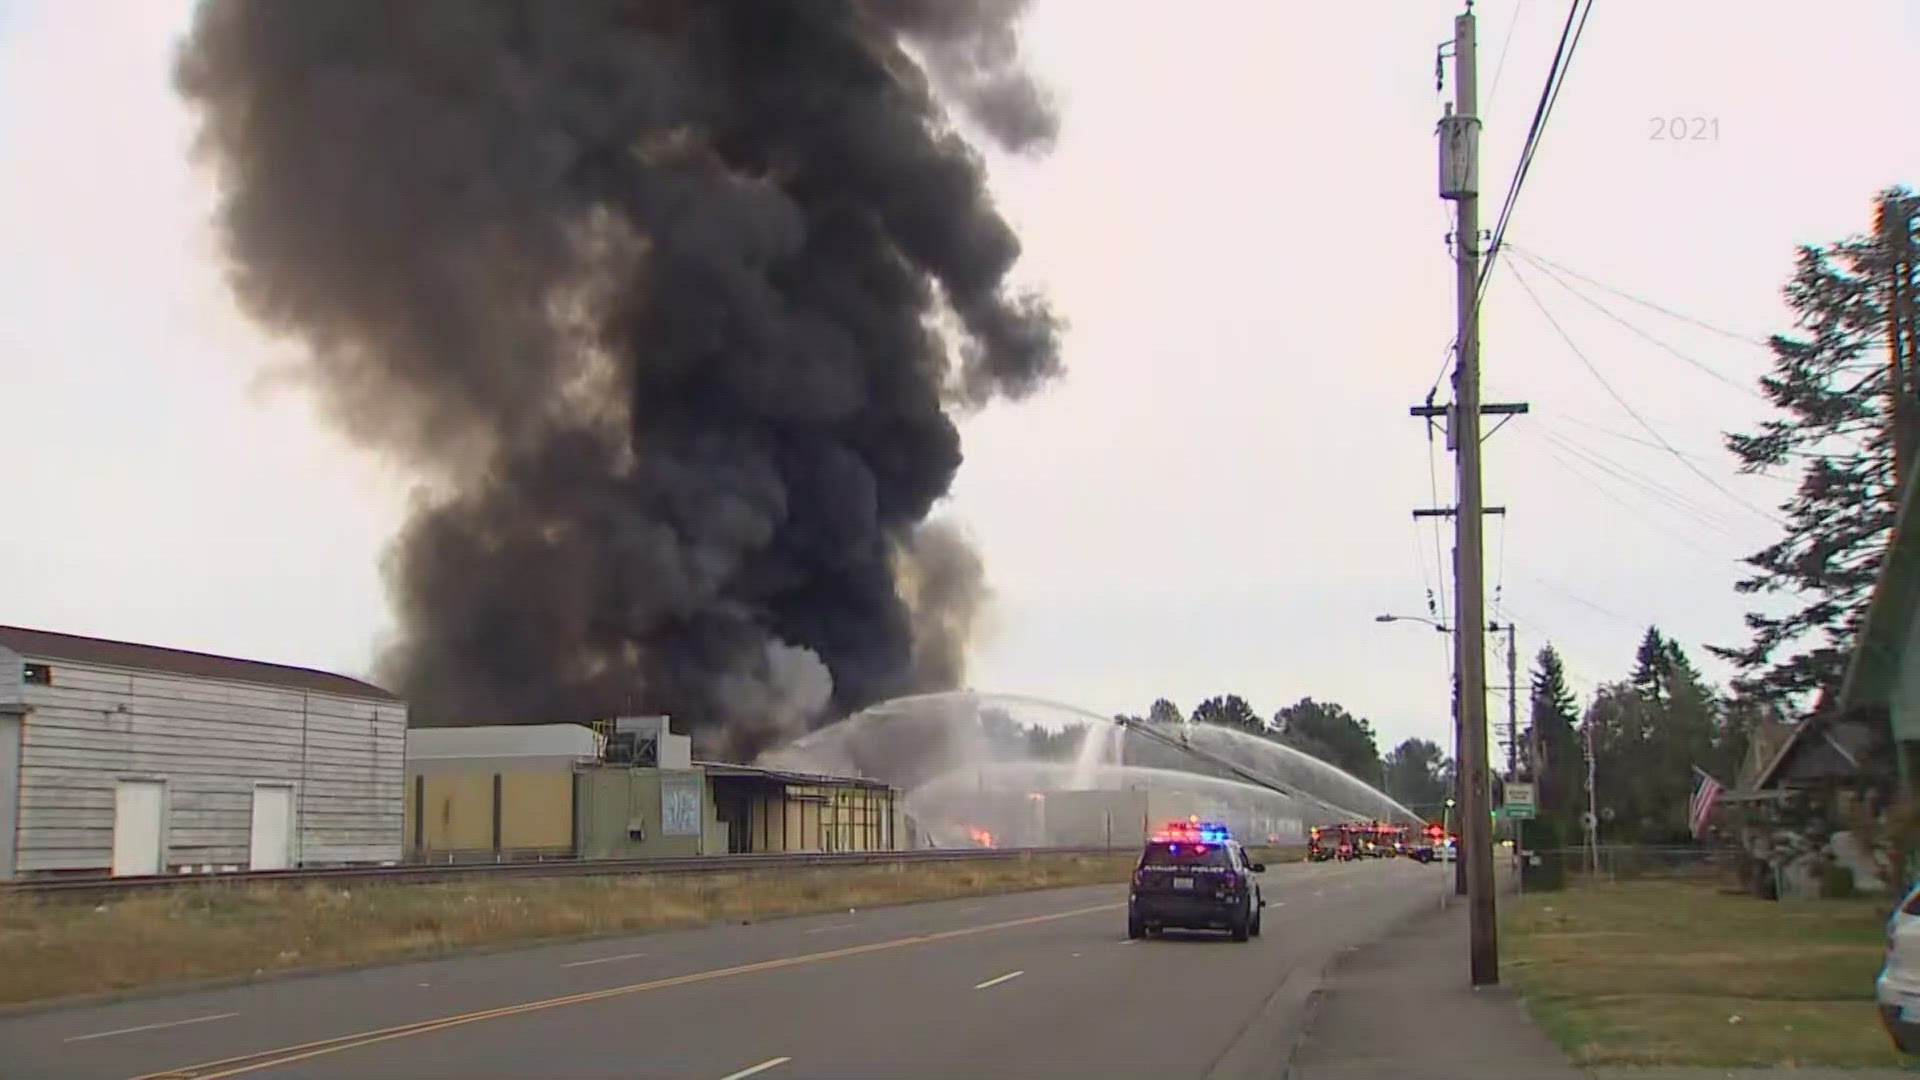 The fire began Tuesday morning at an old cold storage facility in Puyallup.